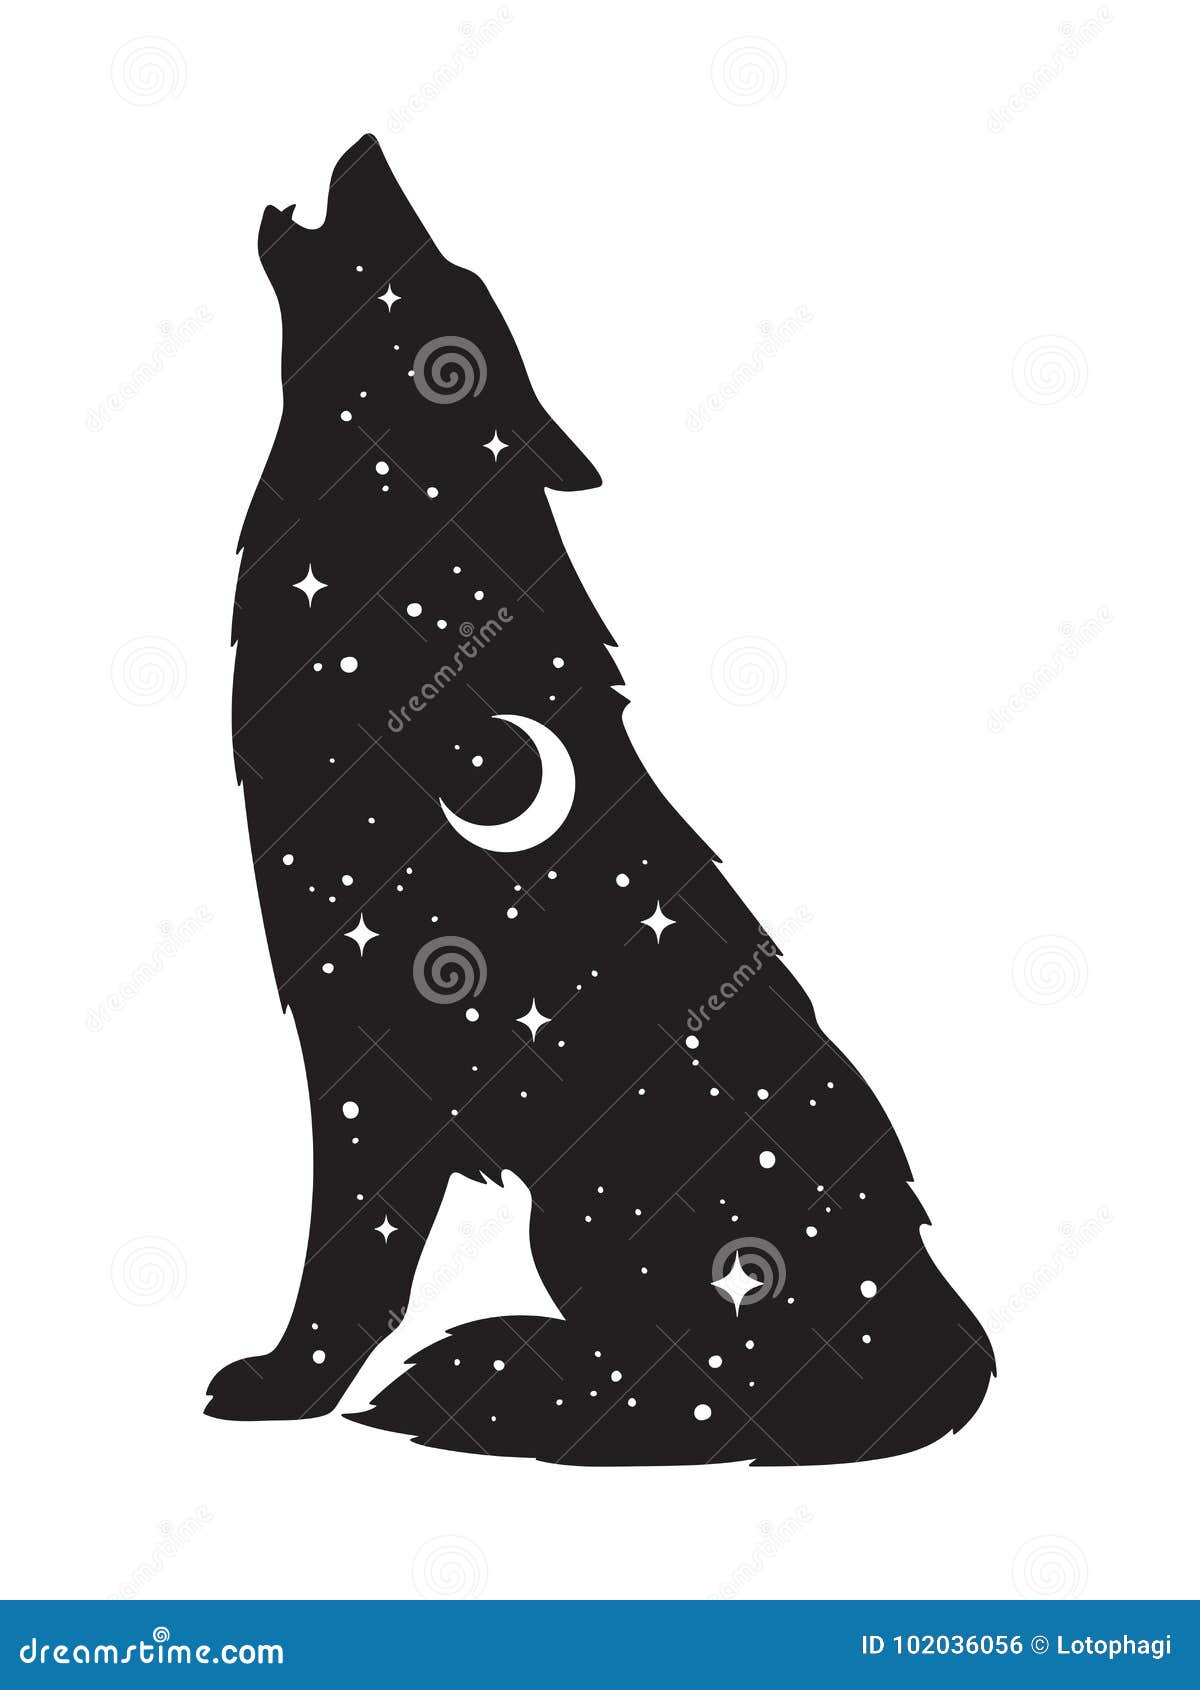 Silhouette of Wolf with Crescent Moon and Stars Isolated. Sticker, Black Work, Print or Flash Tattoo Design Vector Illustration Stock Vector - Illustration of moon, flash: 102036056